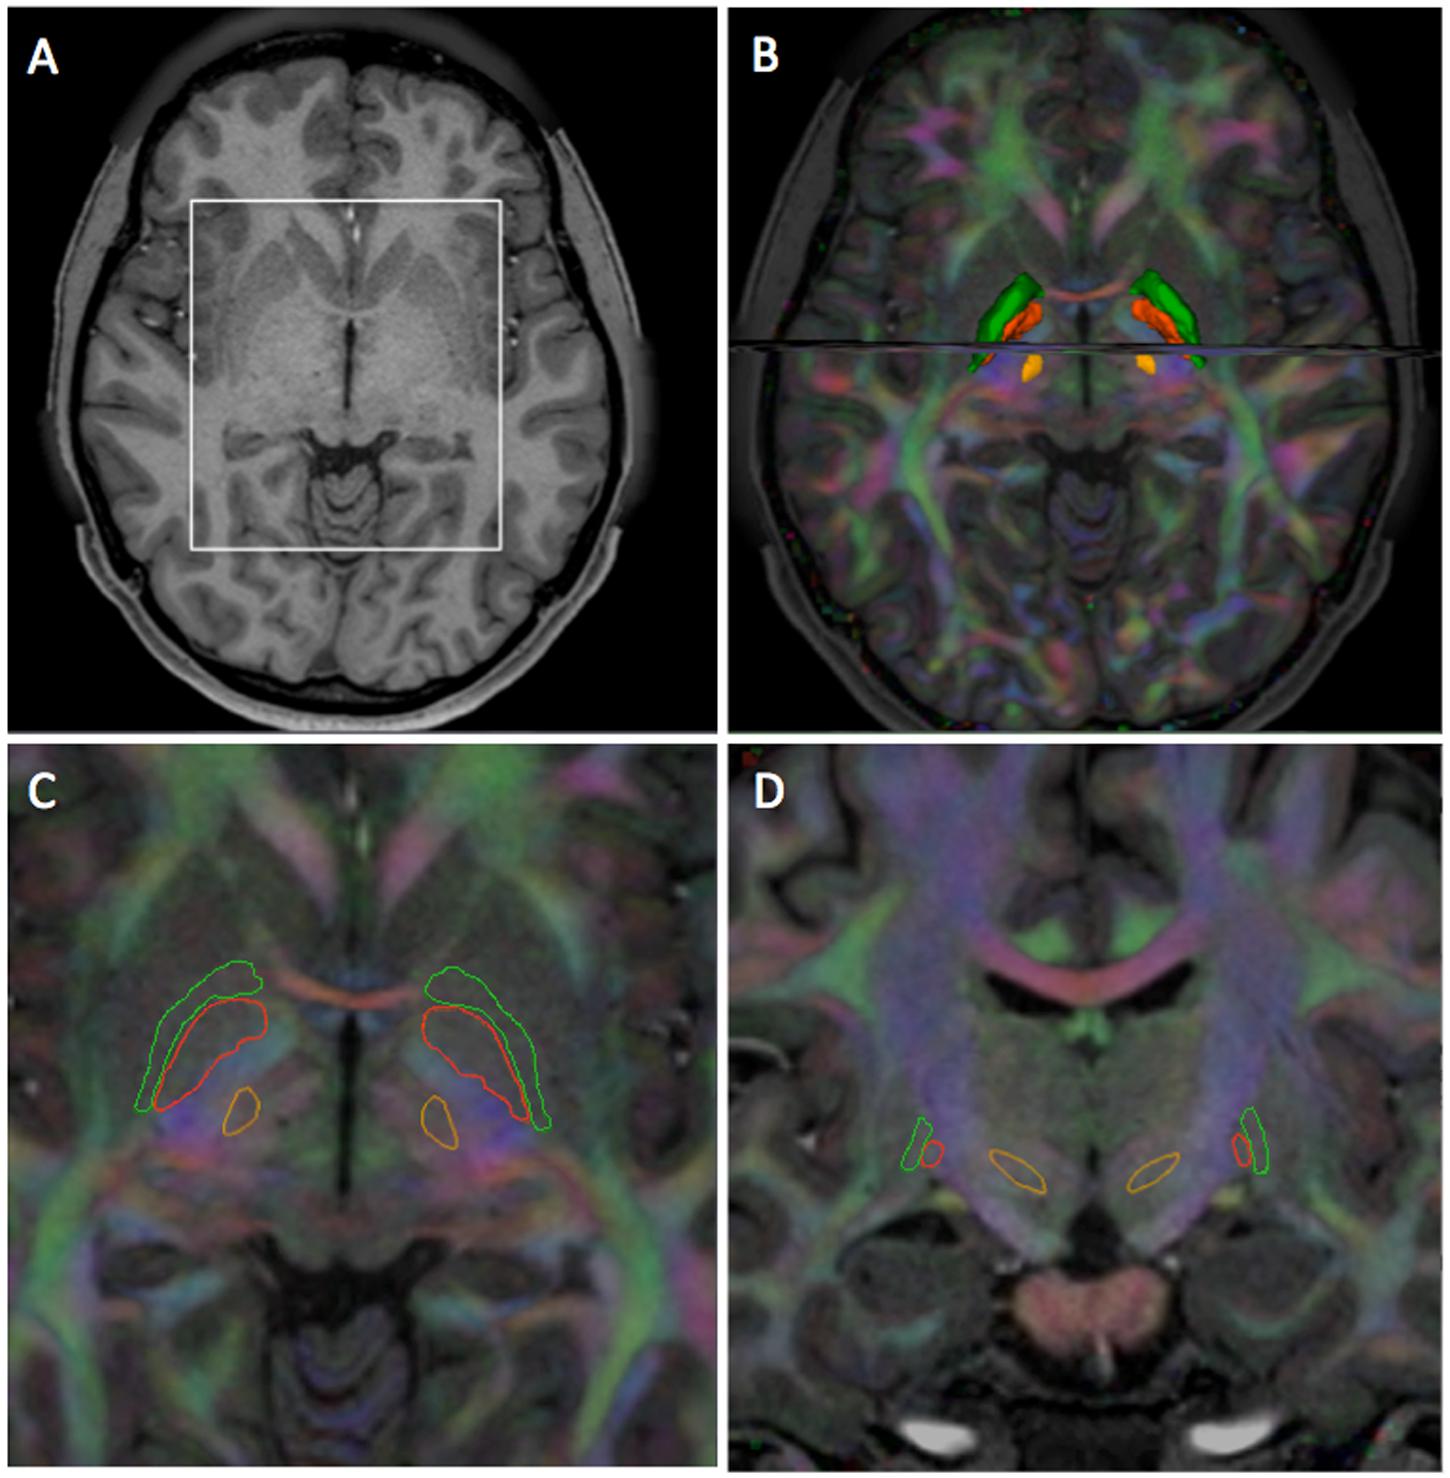 Frontiers  In vivo Exploration of the Connectivity between the Subthalamic  Nucleus and the Globus Pallidus in the Human Brain Using Multi-Fiber  Tractography